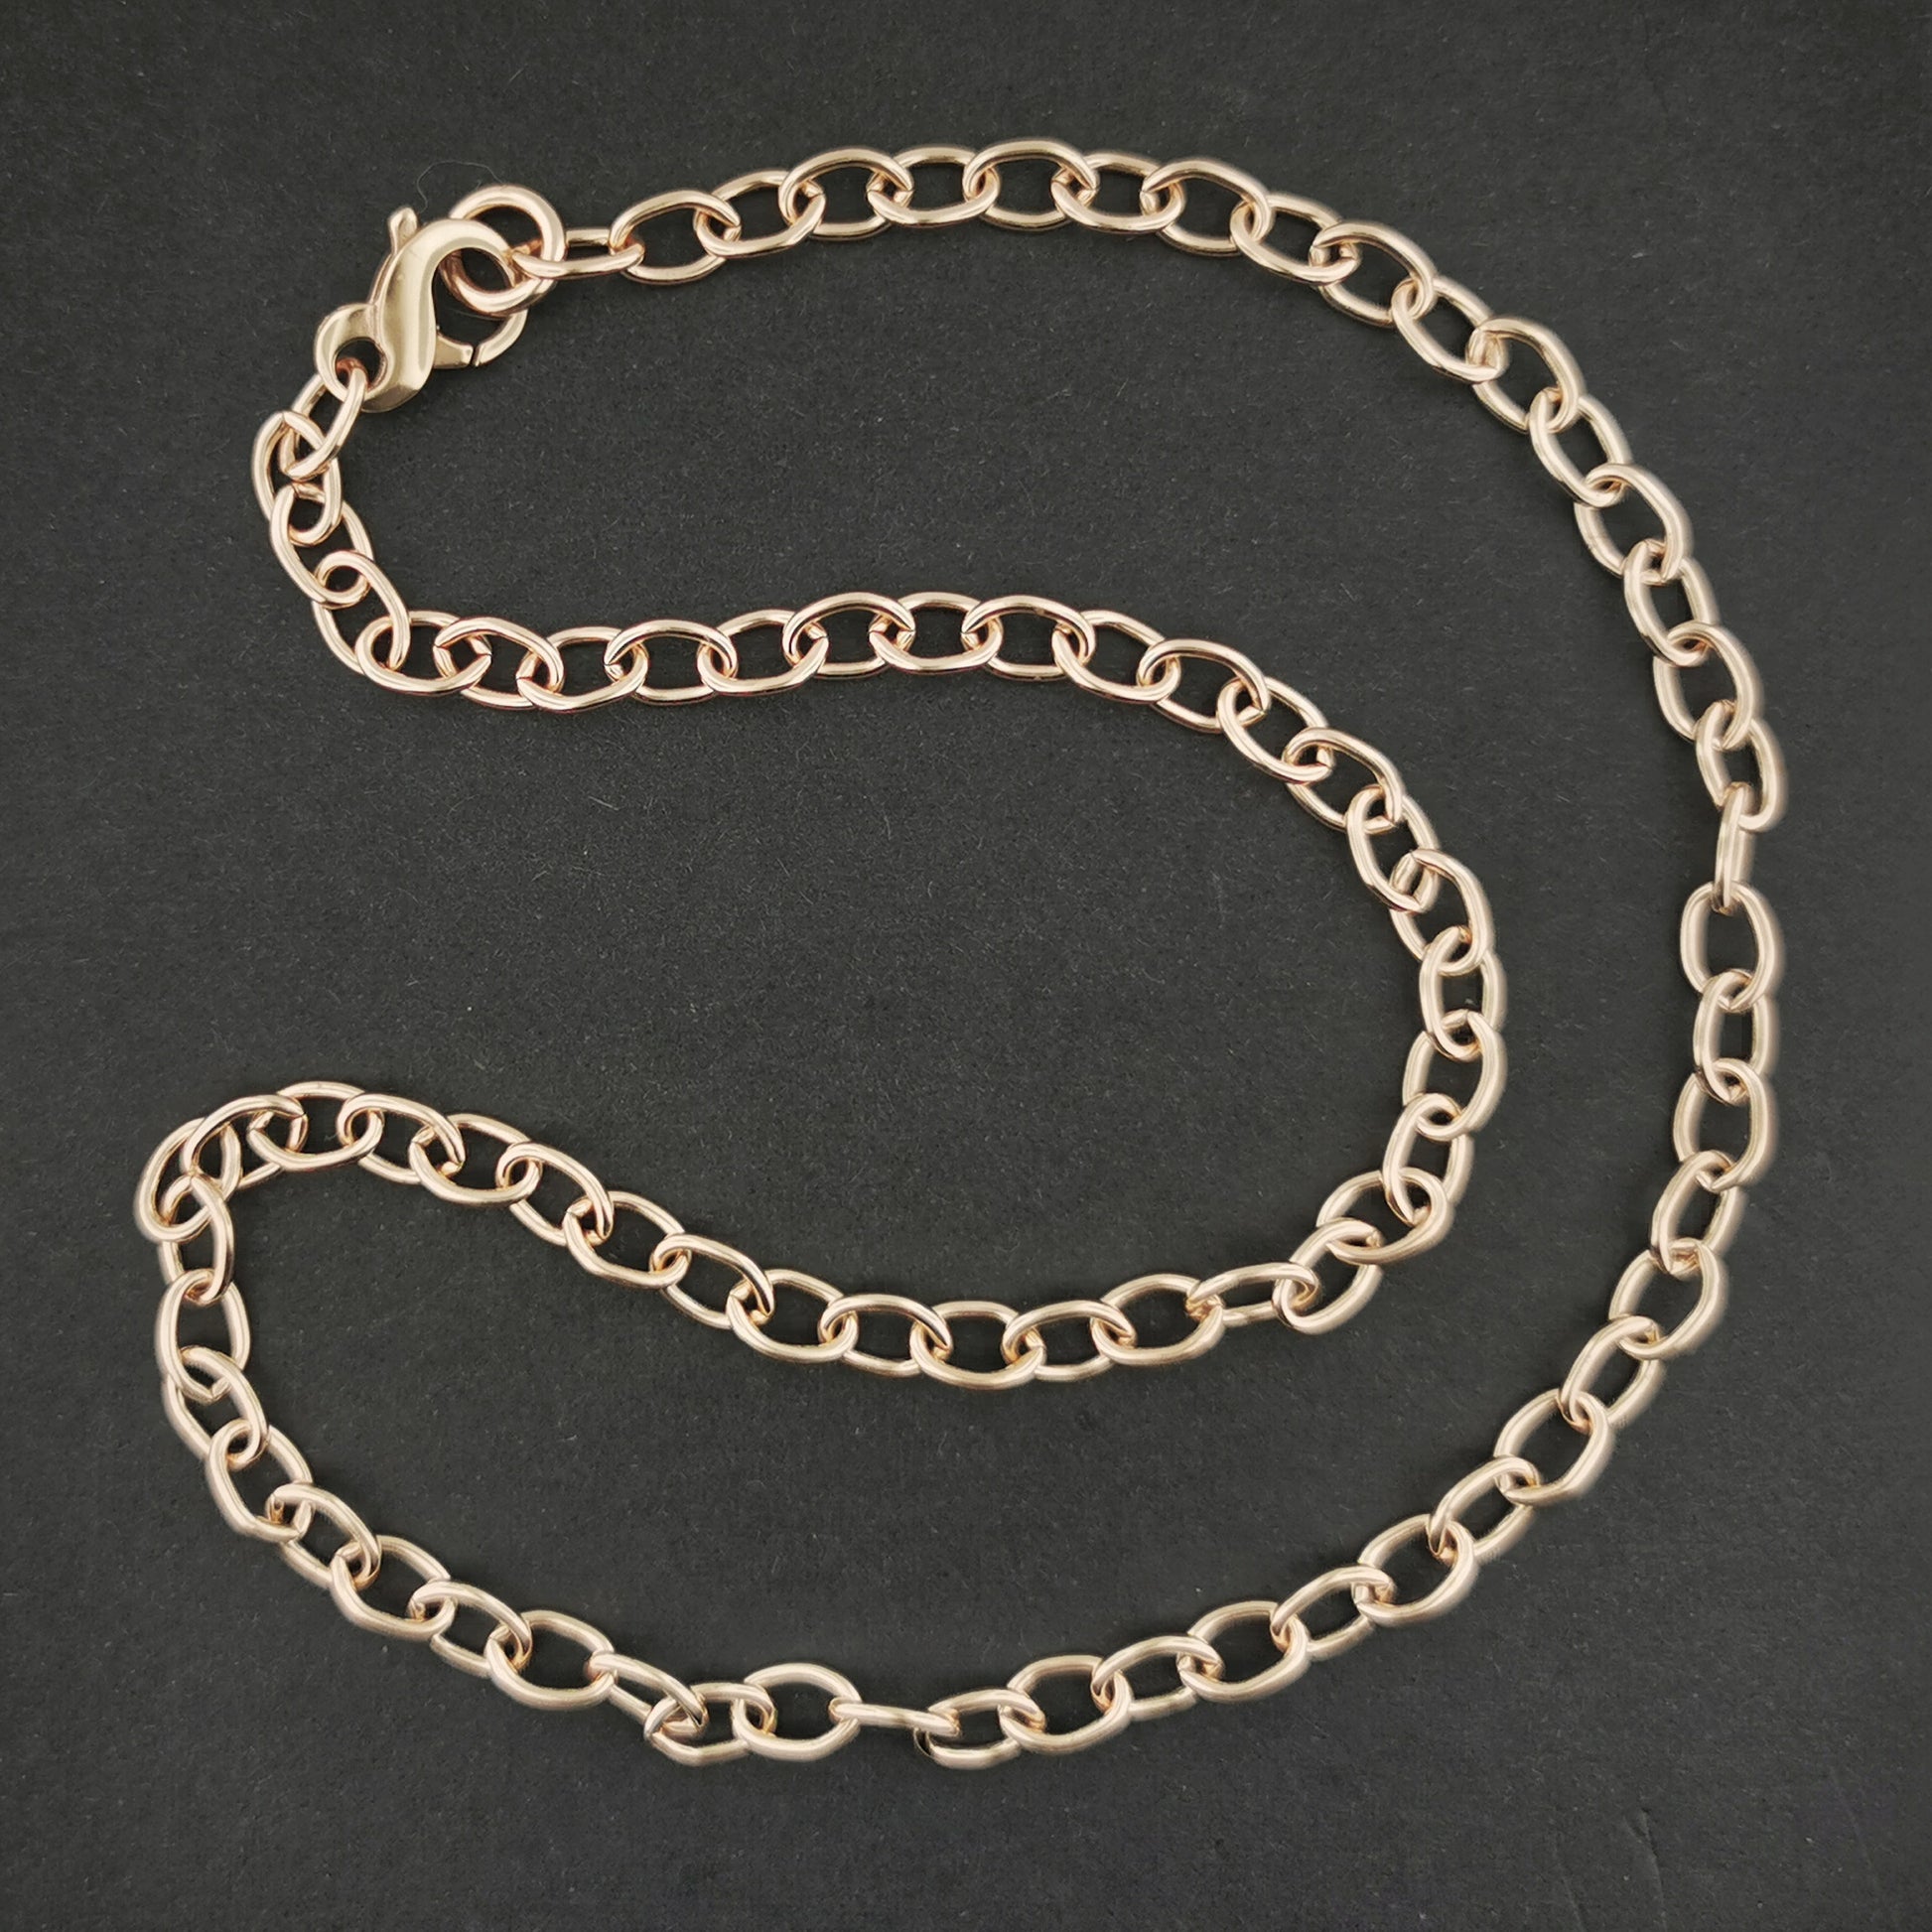 Antique Bronze Cable Chain 5.6mm Made to Order, bronze cable chain, bronze chain, cable chain, necklace chain, bronze necklace chain, 5.6mm chain, 5.6mm bronze chain, bronze chain jewelry, bronze chain jewellery, chain jewelry chain jewellery, bronze jewellery, bronze jewelry, 5.6mm chain necklace, 5.6mm bronze chain necklace